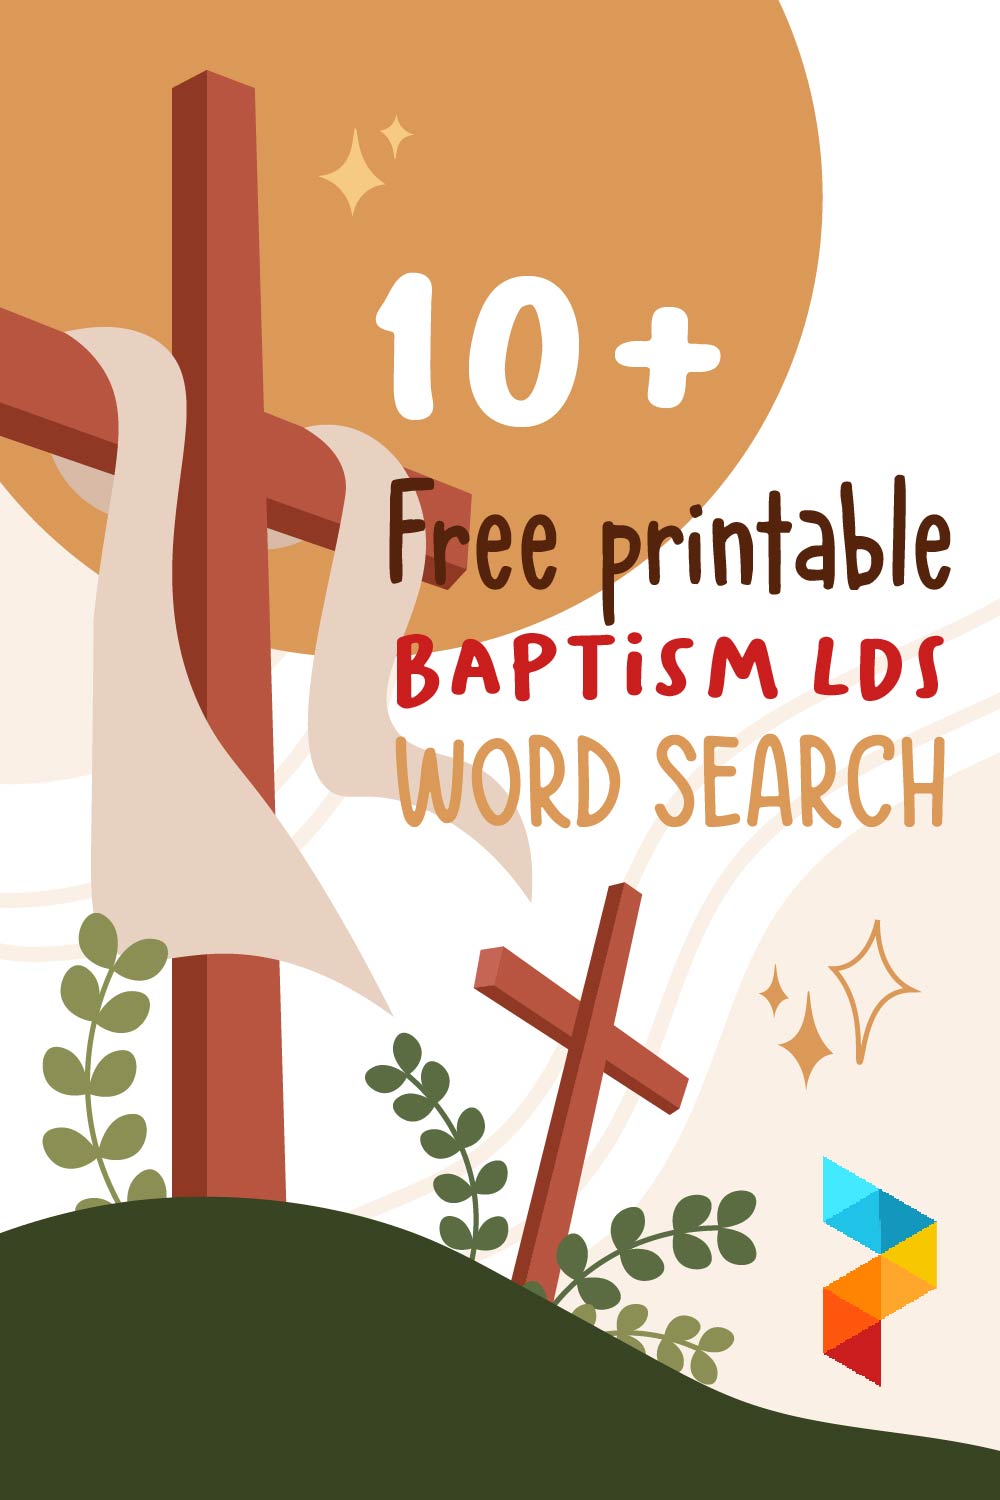 Baptism LDS Word Search